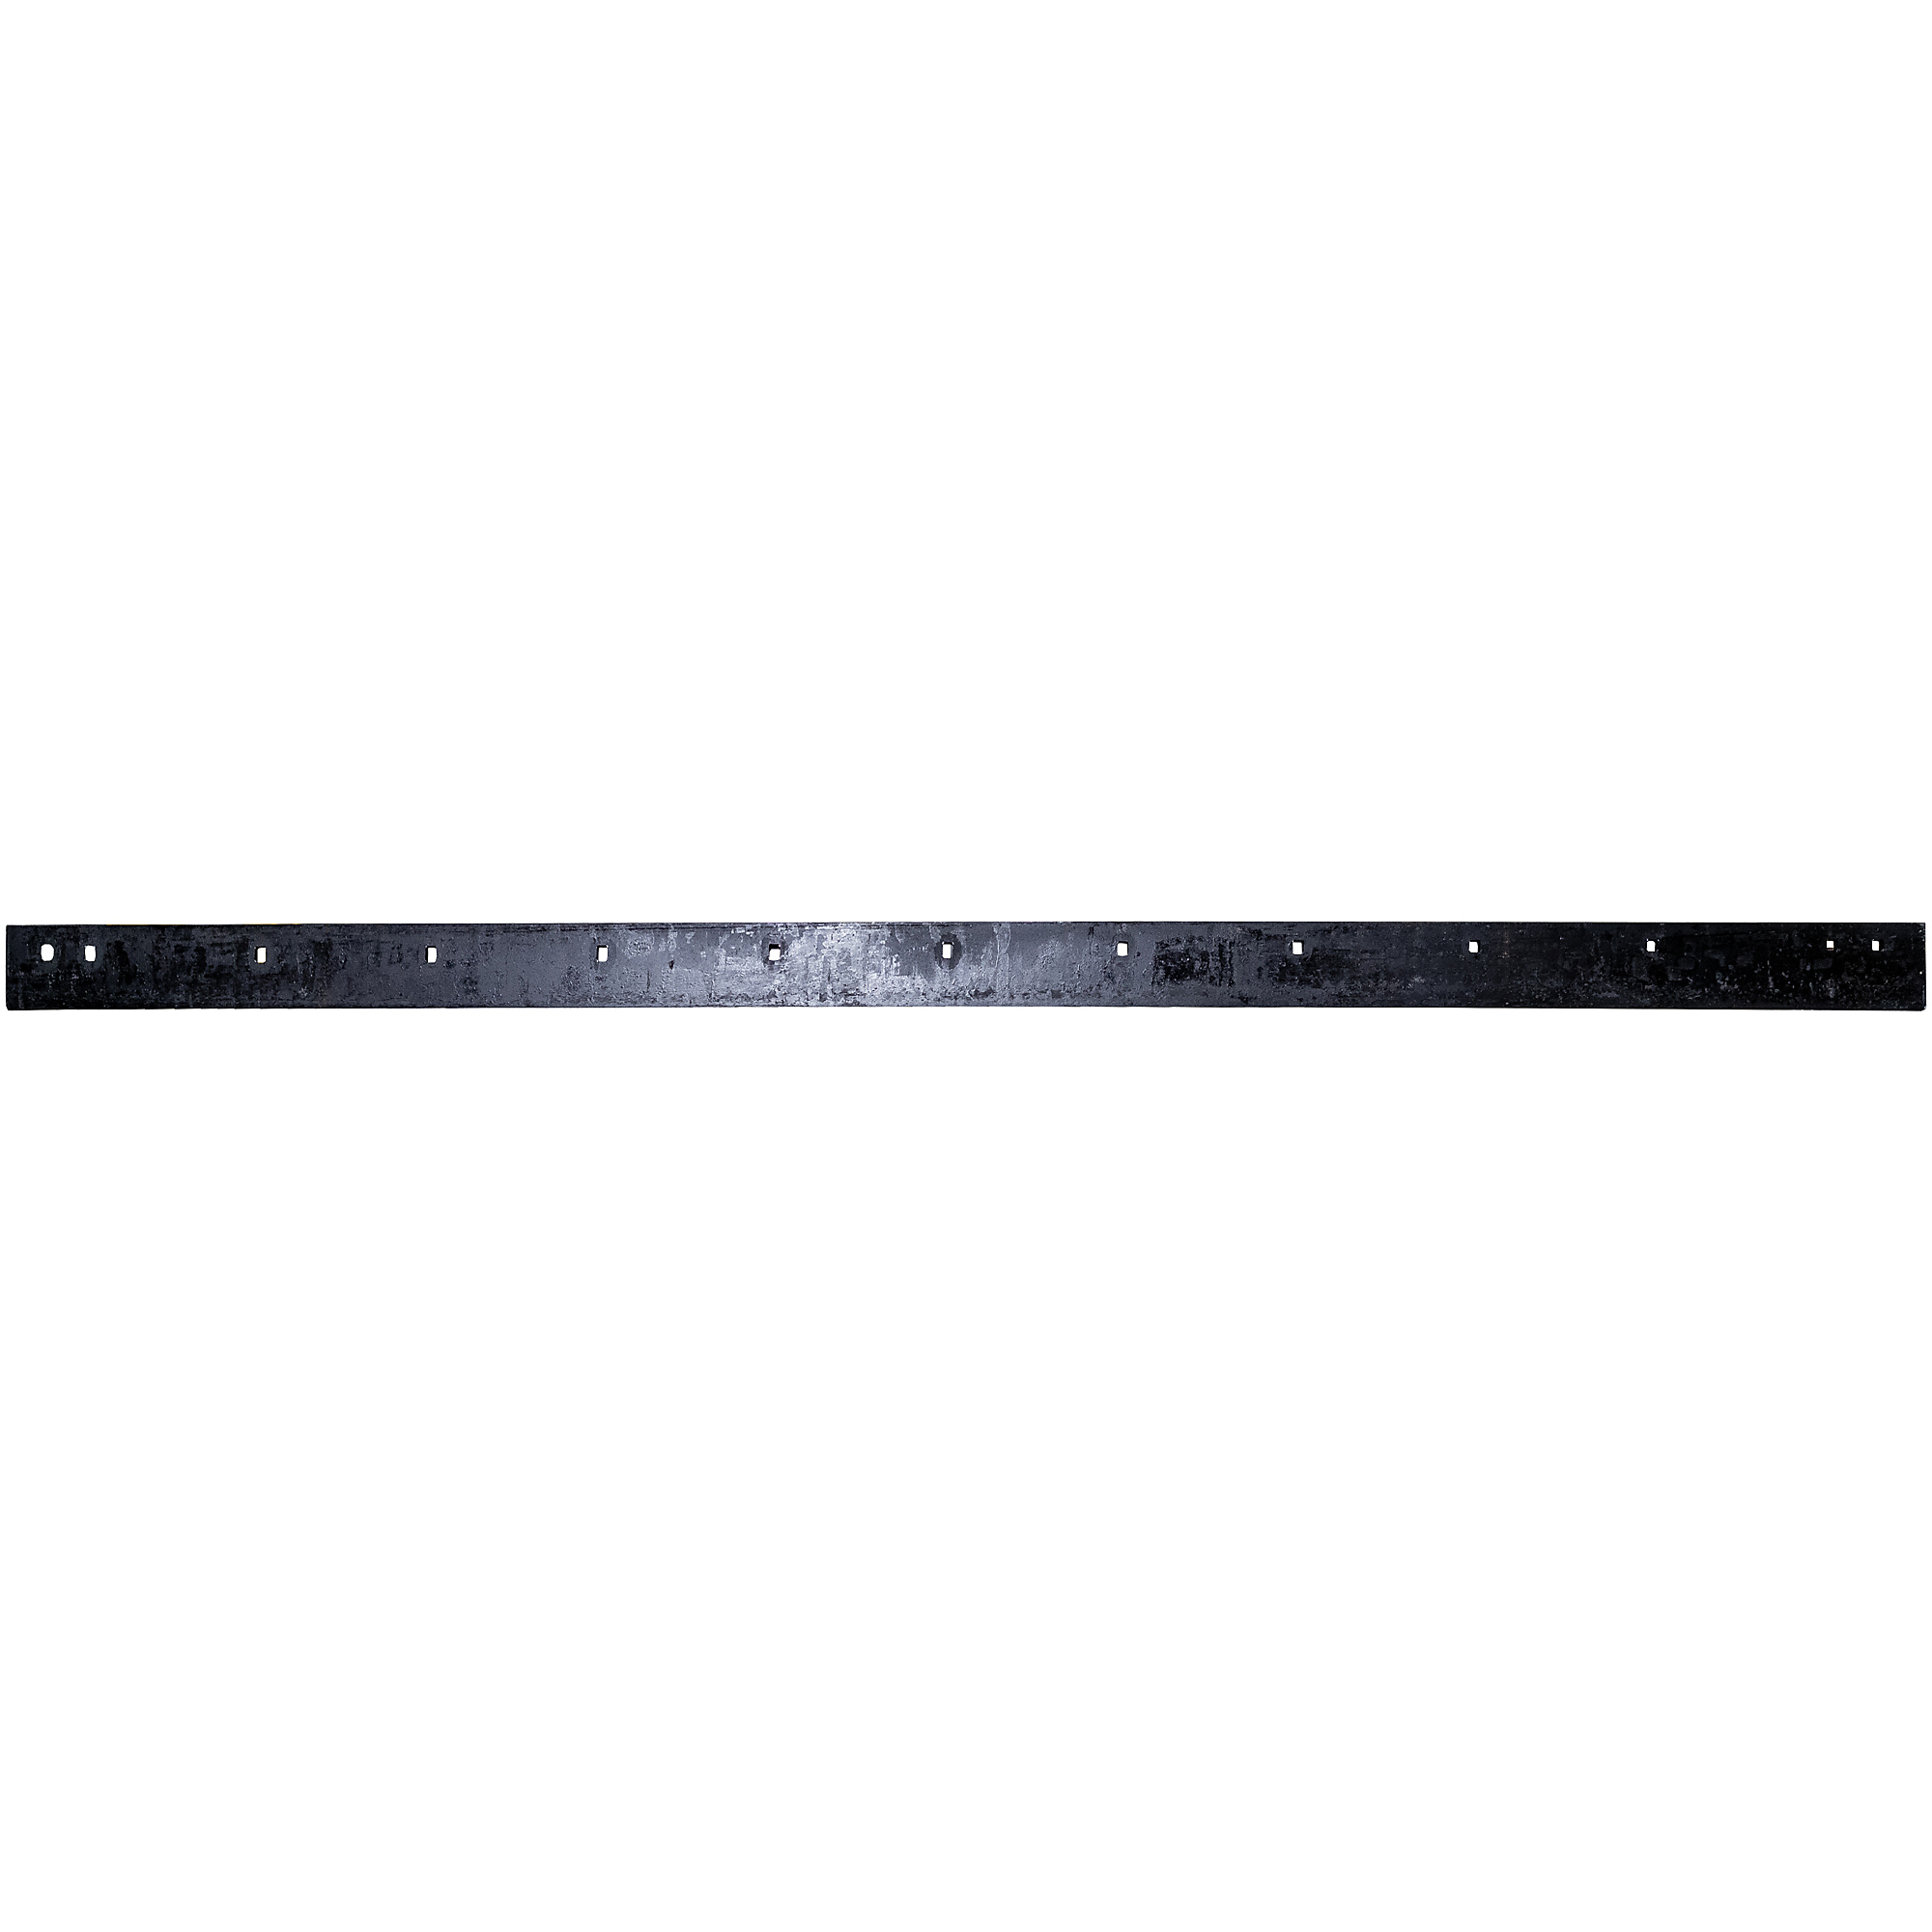 Buyers Products, SAM Cutting Edge 5/8 x 6 x 132Inch, Material Carbon Steel, Length 132 ft, Model 1317001